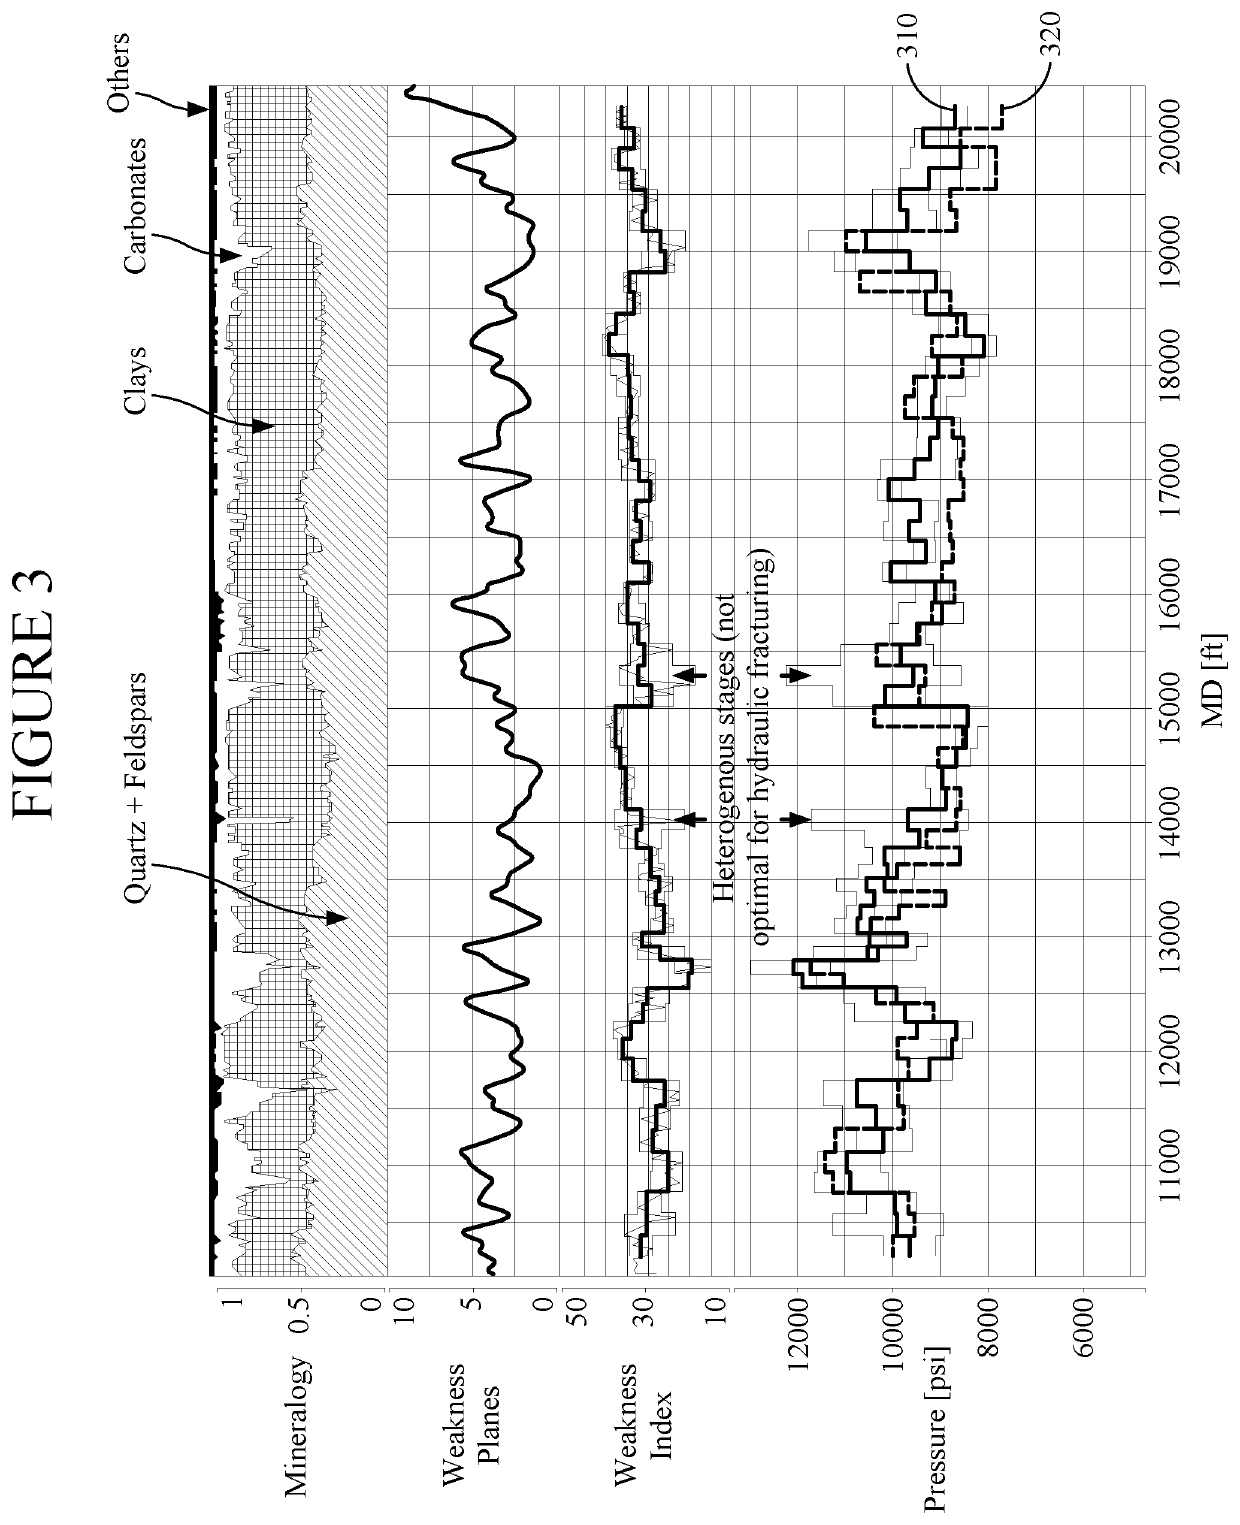 Method and system for estimating breakdown pressure using rock weakness index